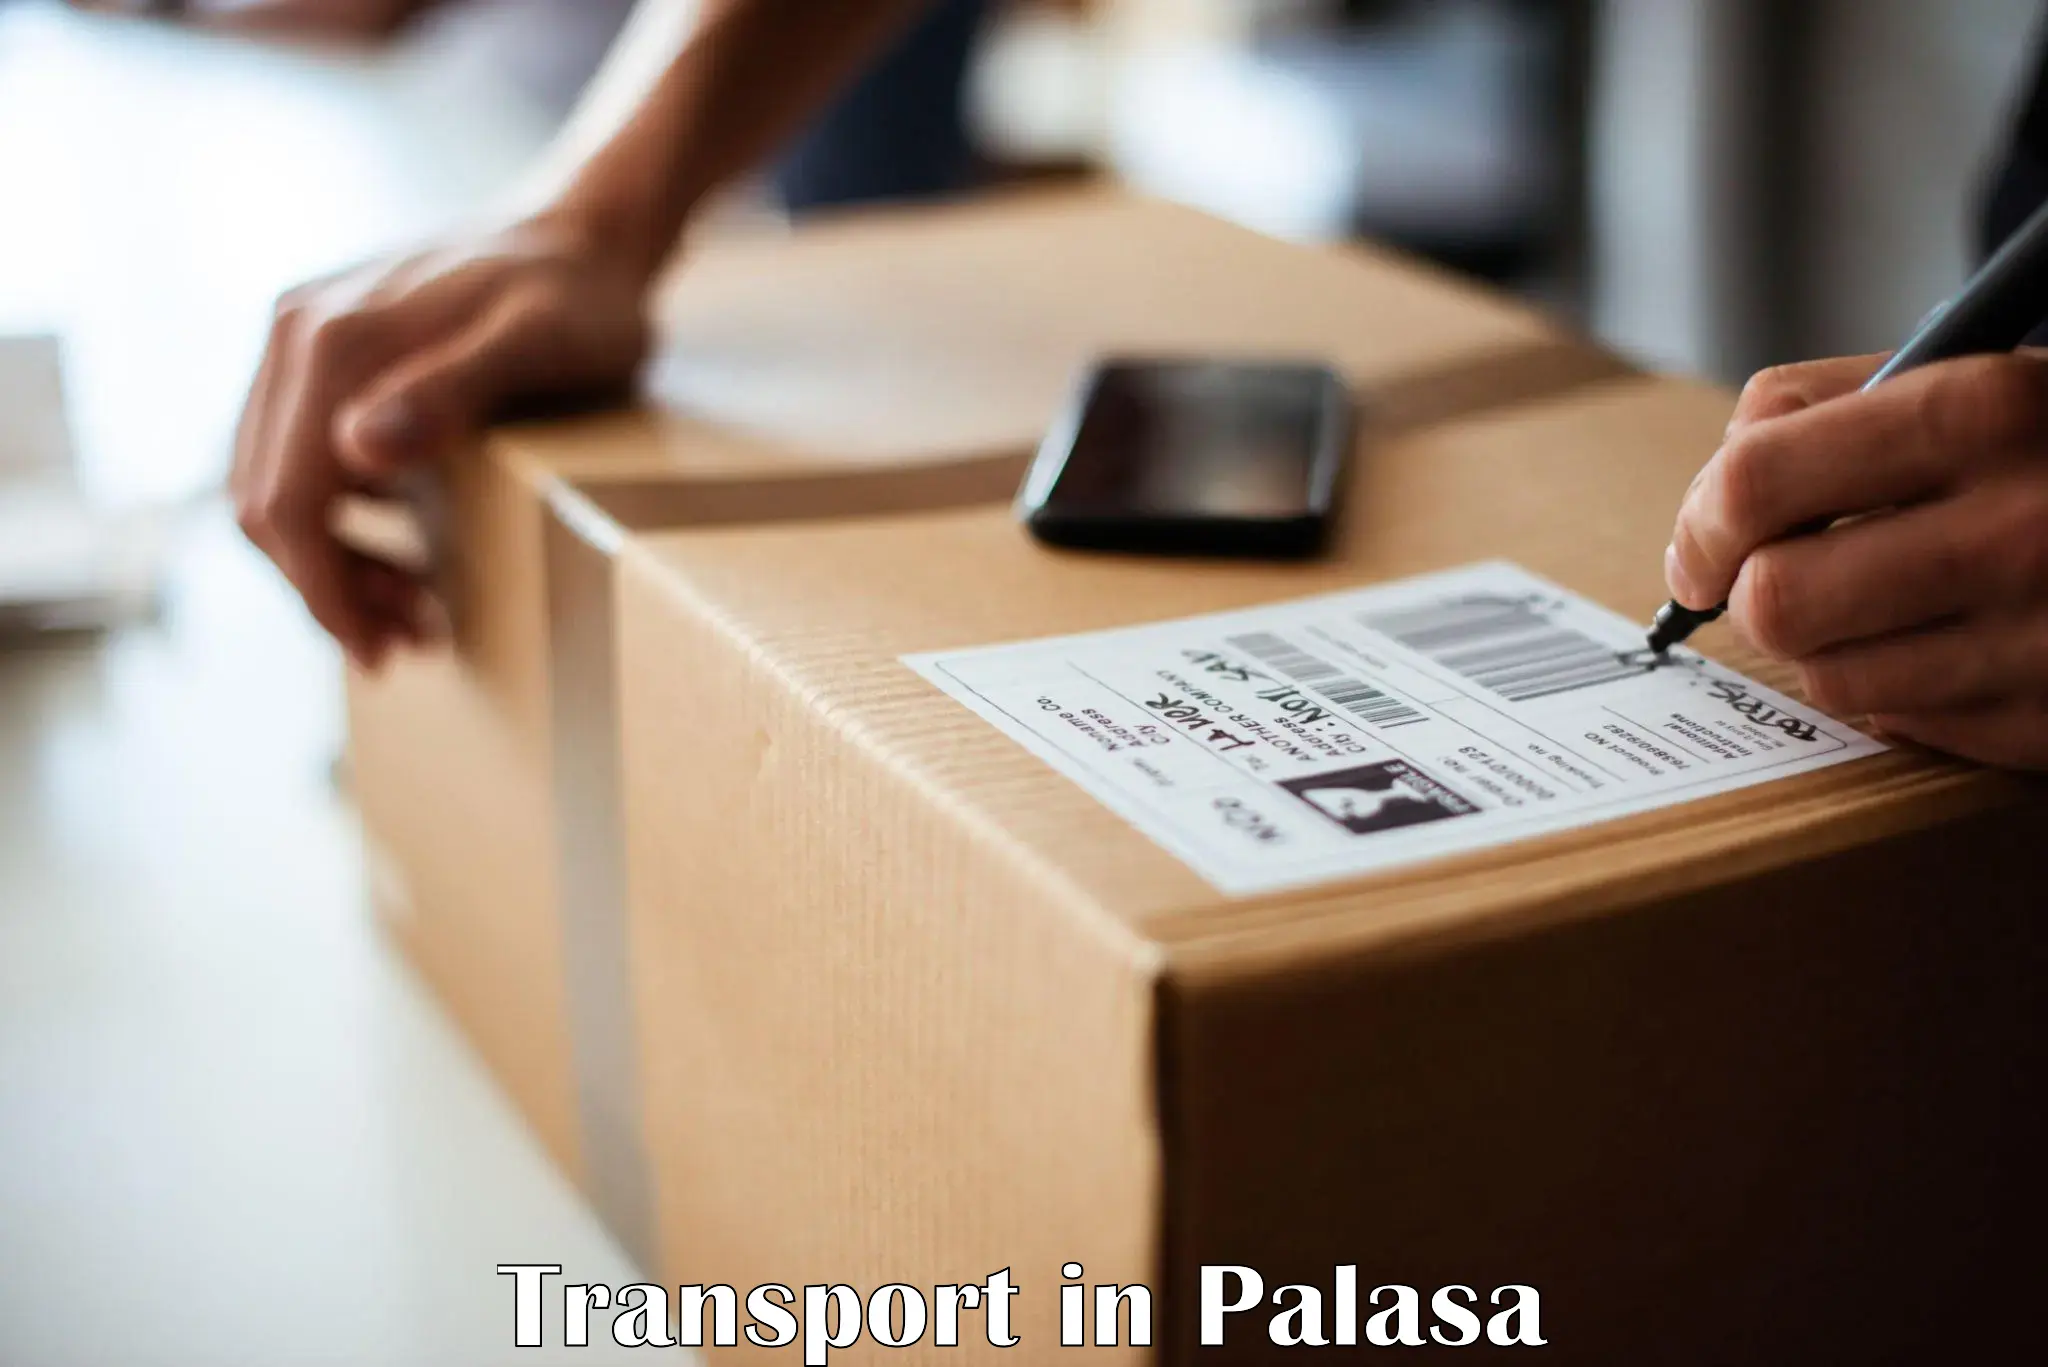 Vehicle transport services in Palasa